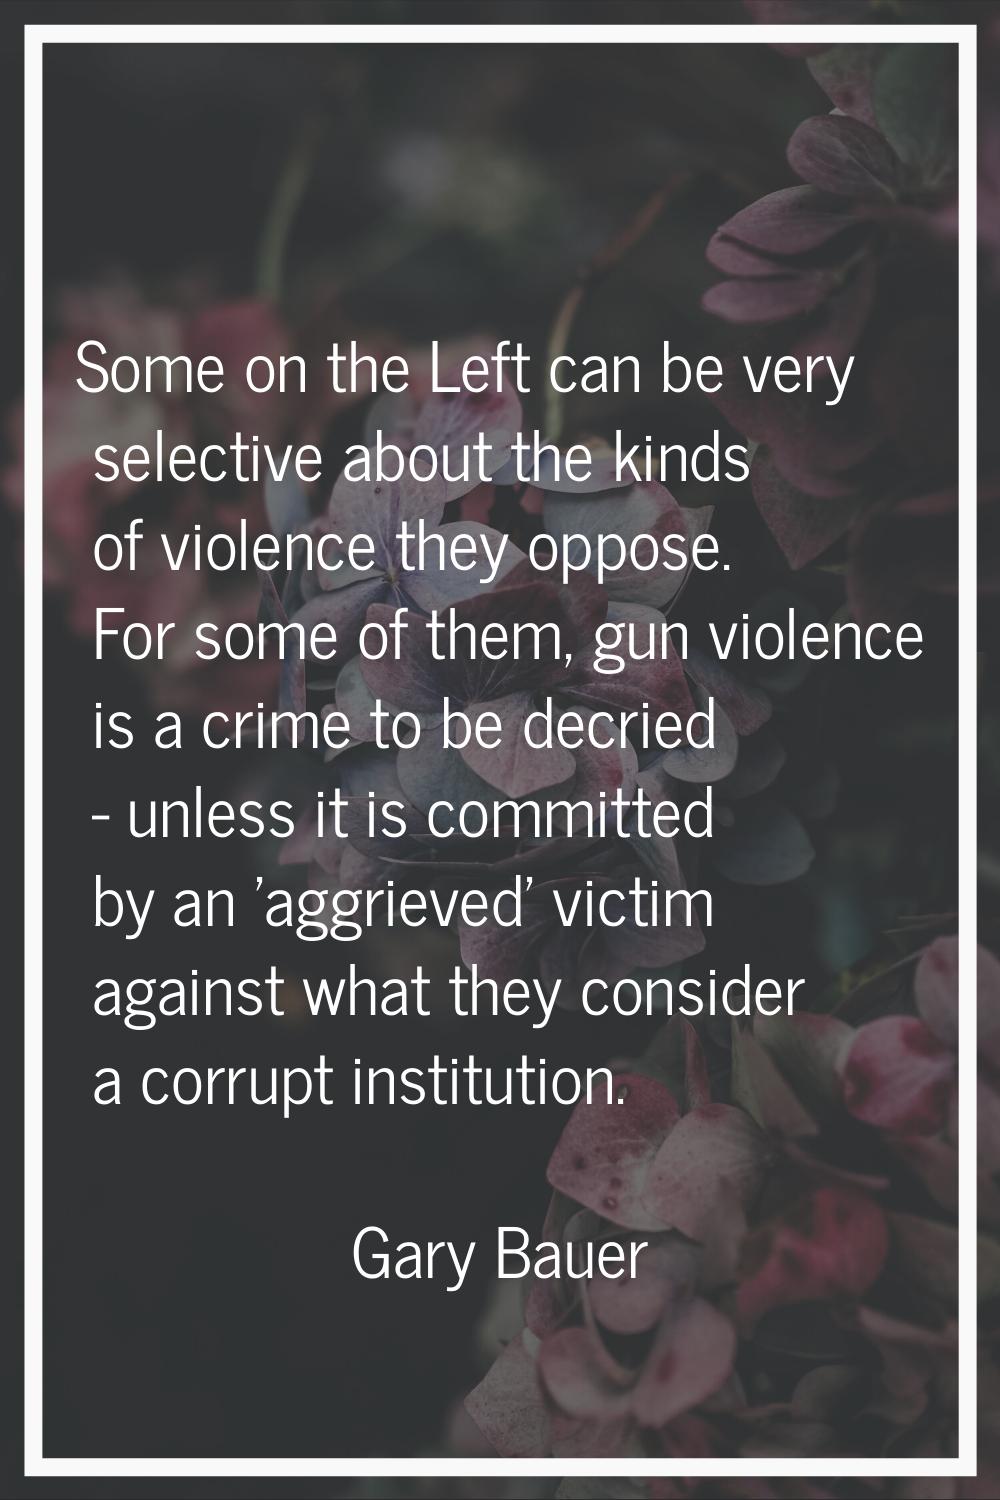 Some on the Left can be very selective about the kinds of violence they oppose. For some of them, g